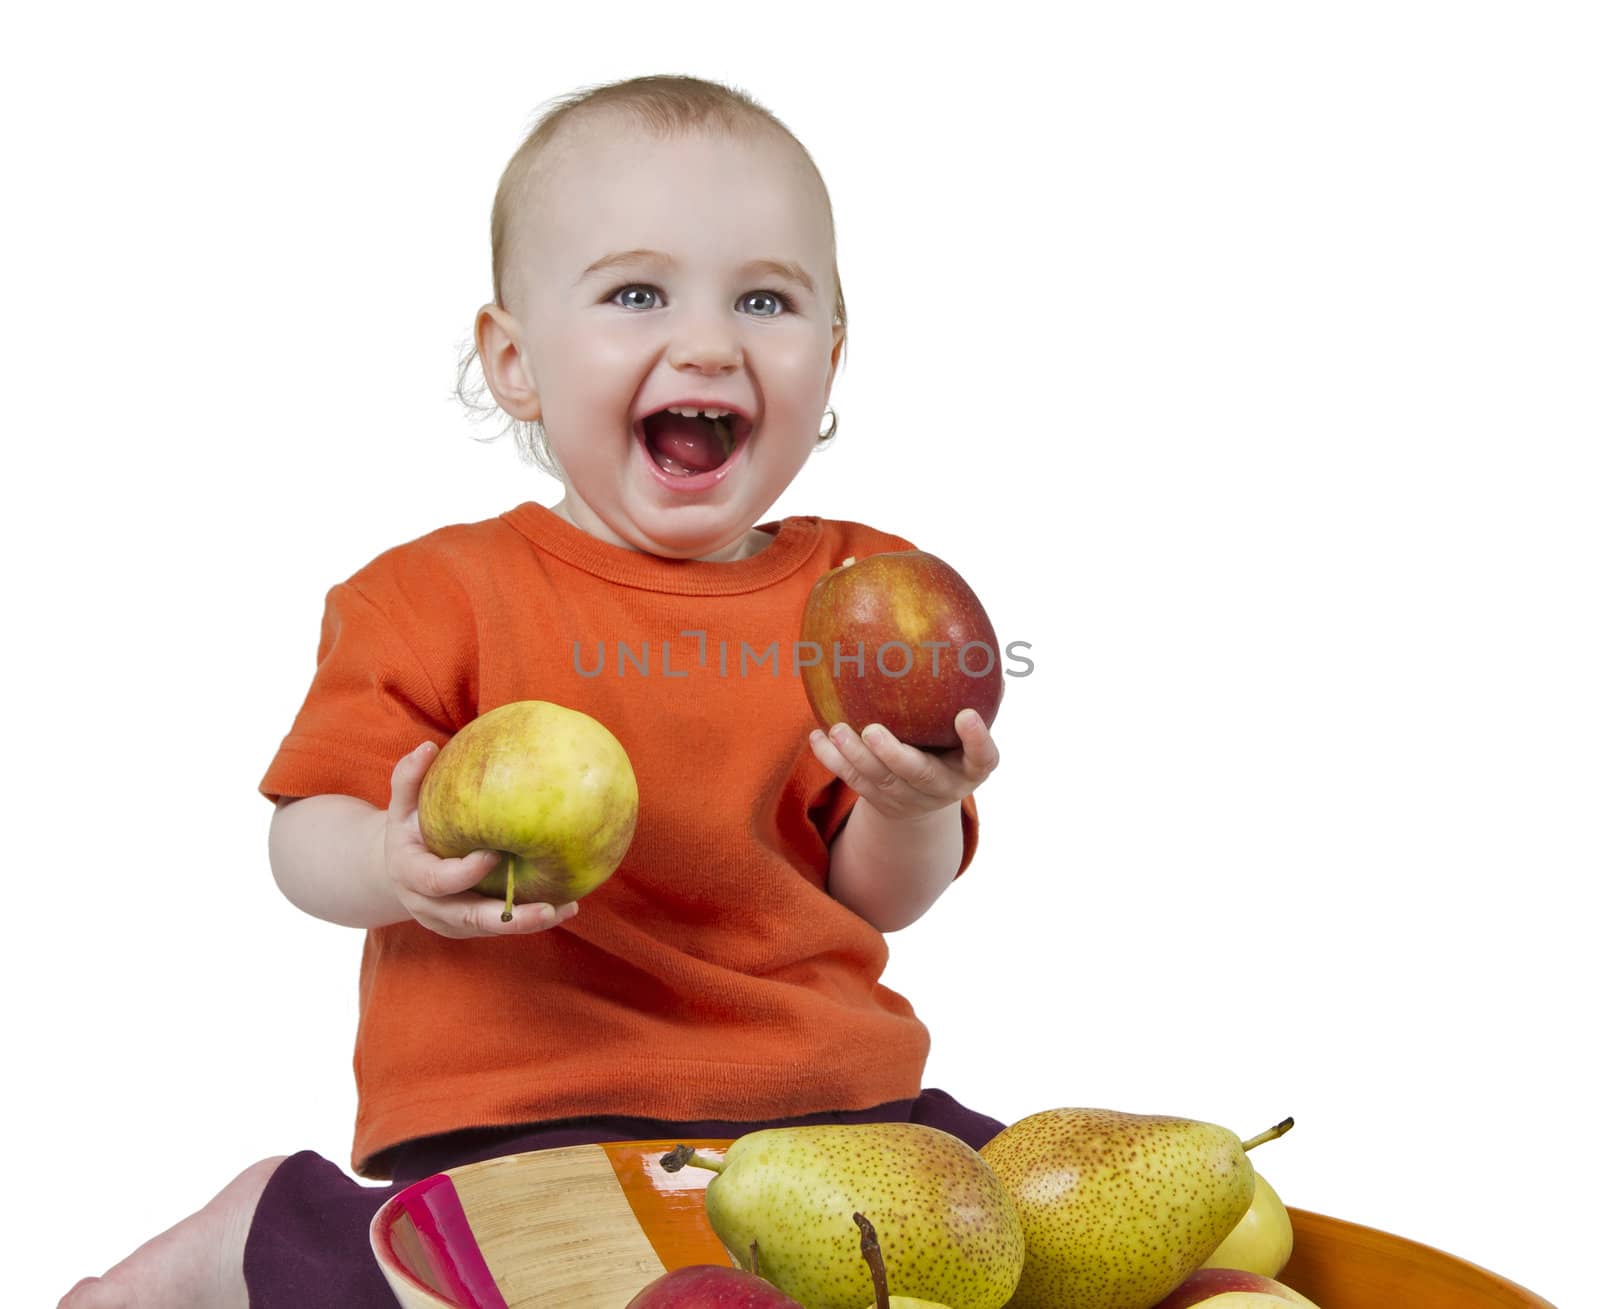 baby with apples and pears laying in bowl - studio shot